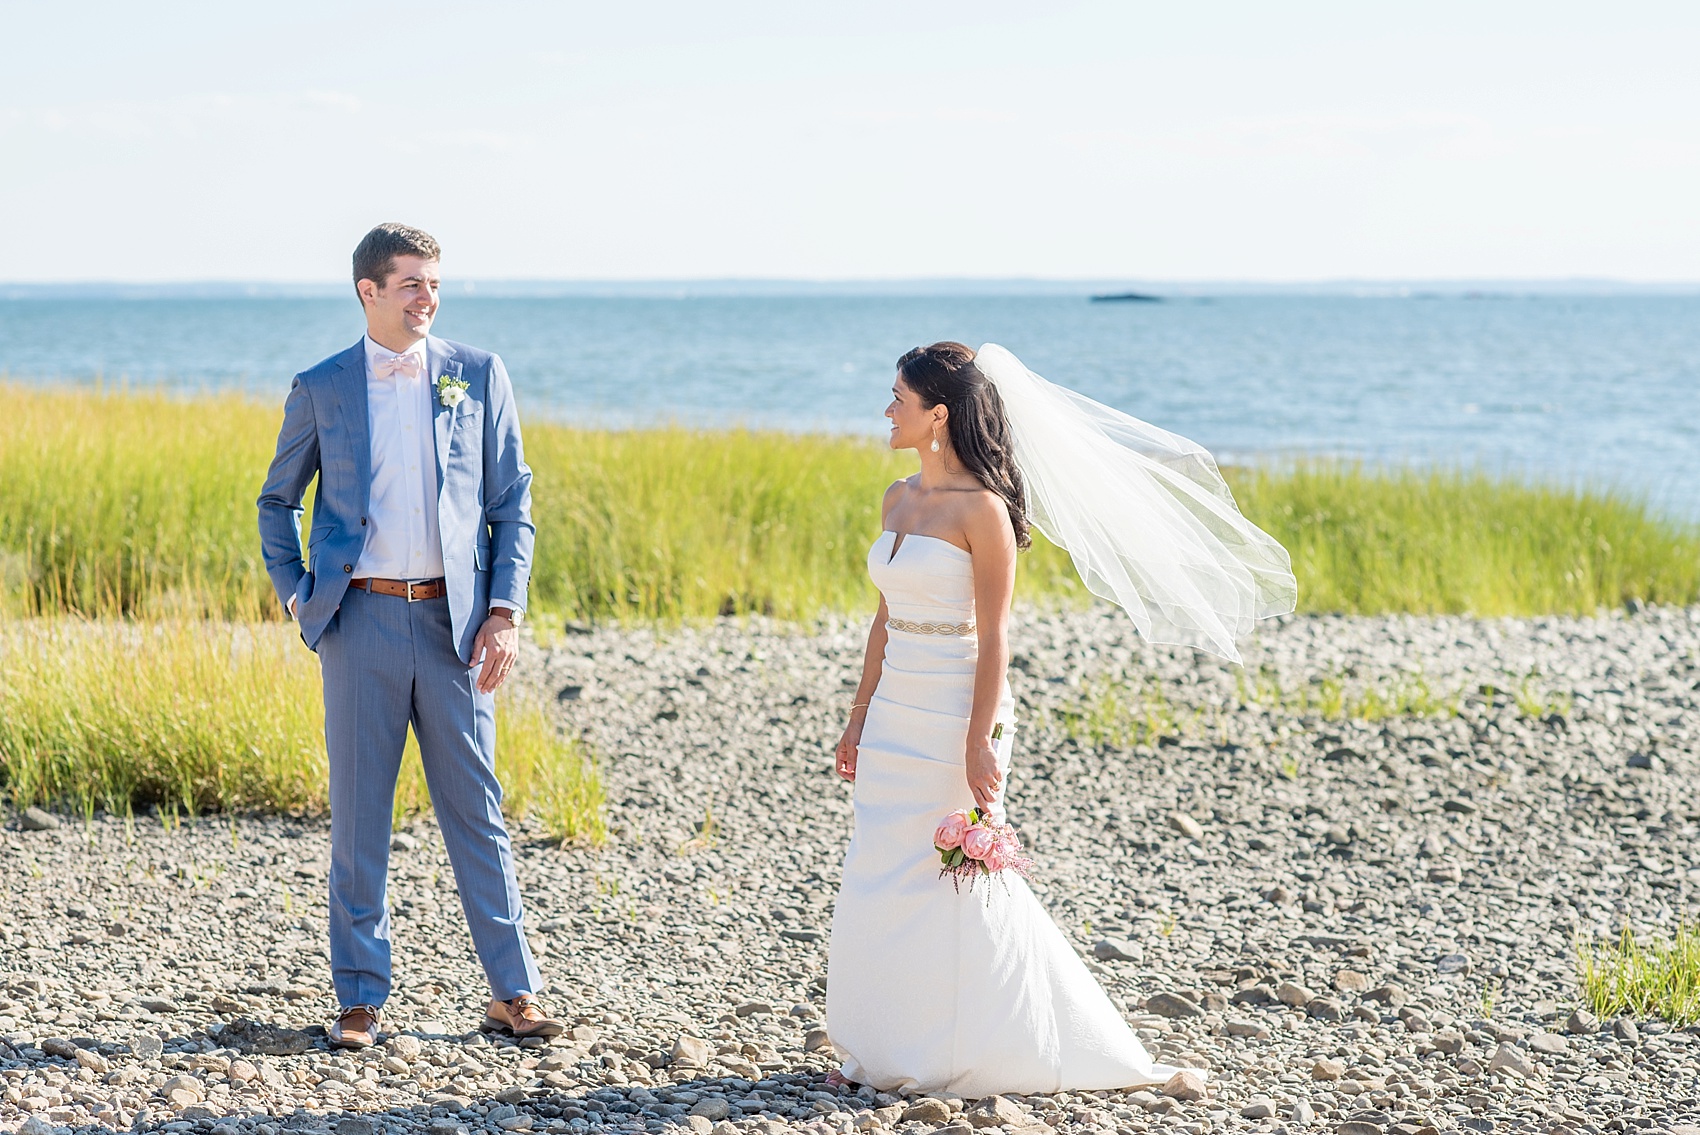 Connecticut beach wedding photos by Mikkel Paige Photography. Groom in blue suit and pink bow tie.